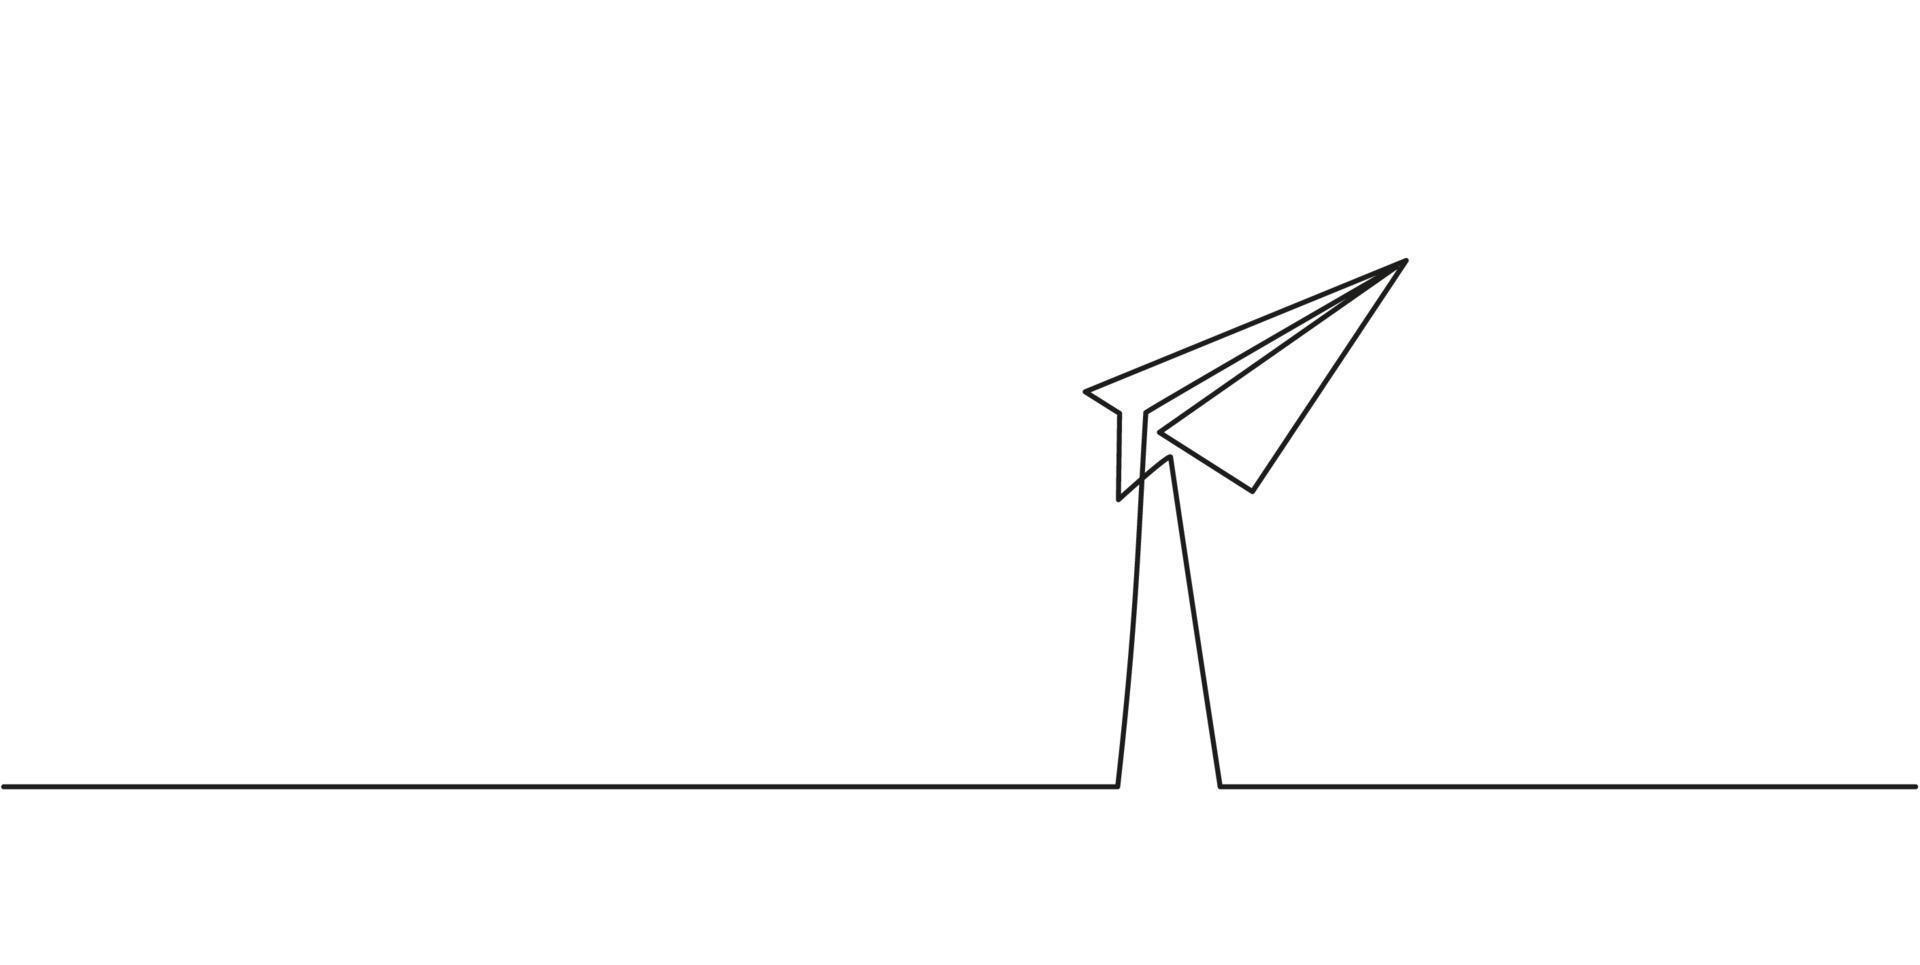 Paper plane continuous one line drawing vector